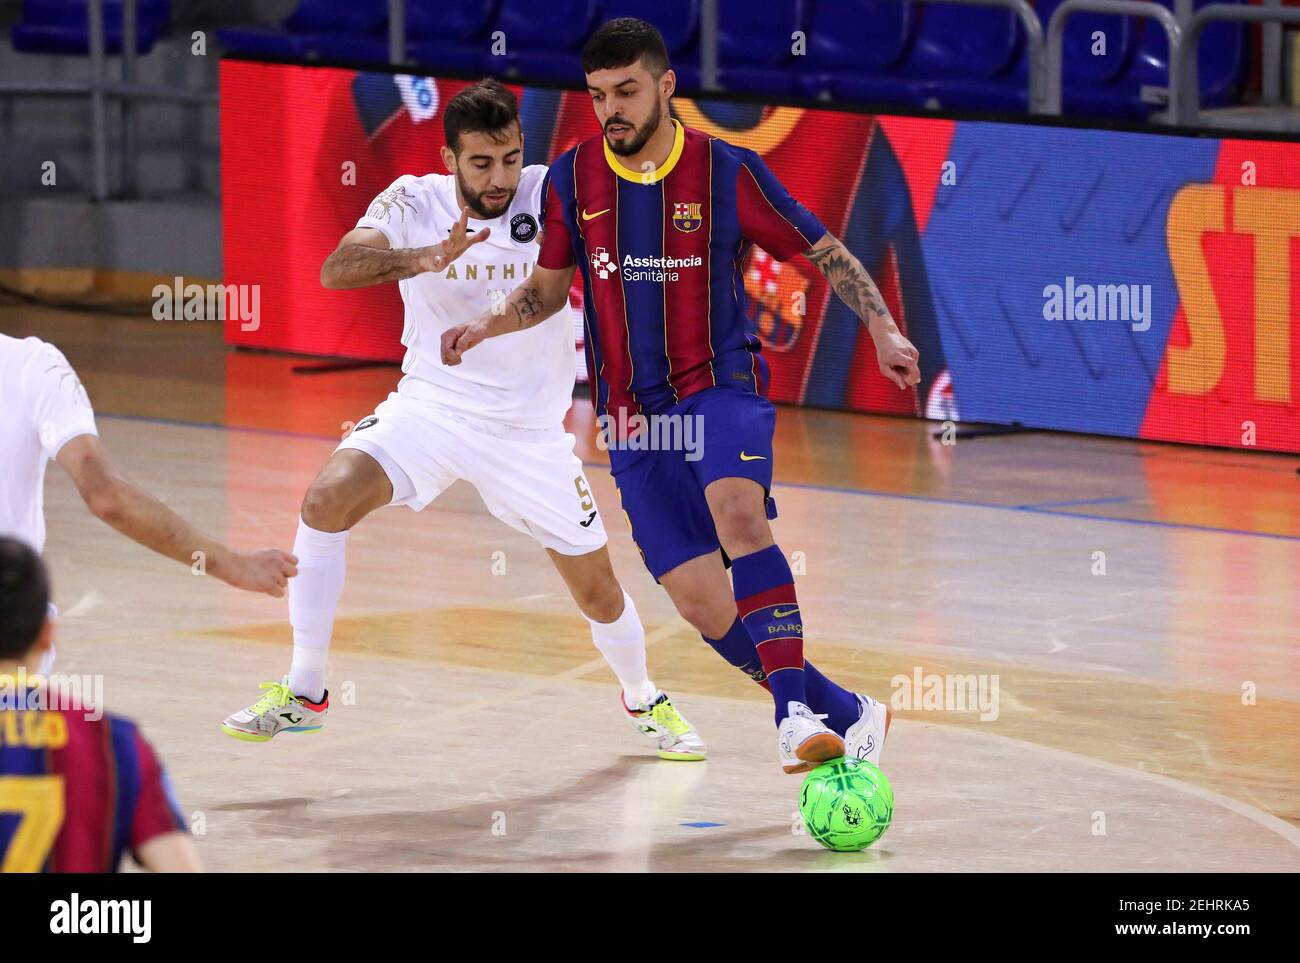 Barcelona, Spain. 19th Feb, 2021. Matheus Rodrigues and Bilal Bakkali during the match between FC Barcelona vs ACCS Asnieres Villeneuve 92, corresponding to the 1/8 final of the Futsal Champions League, played at the Palau Blaugrana, in Barcelona on February 19, 2020. Photo JGS/Cordon Press Credit: CORDON PRESS/Alamy Live News Stock Photo